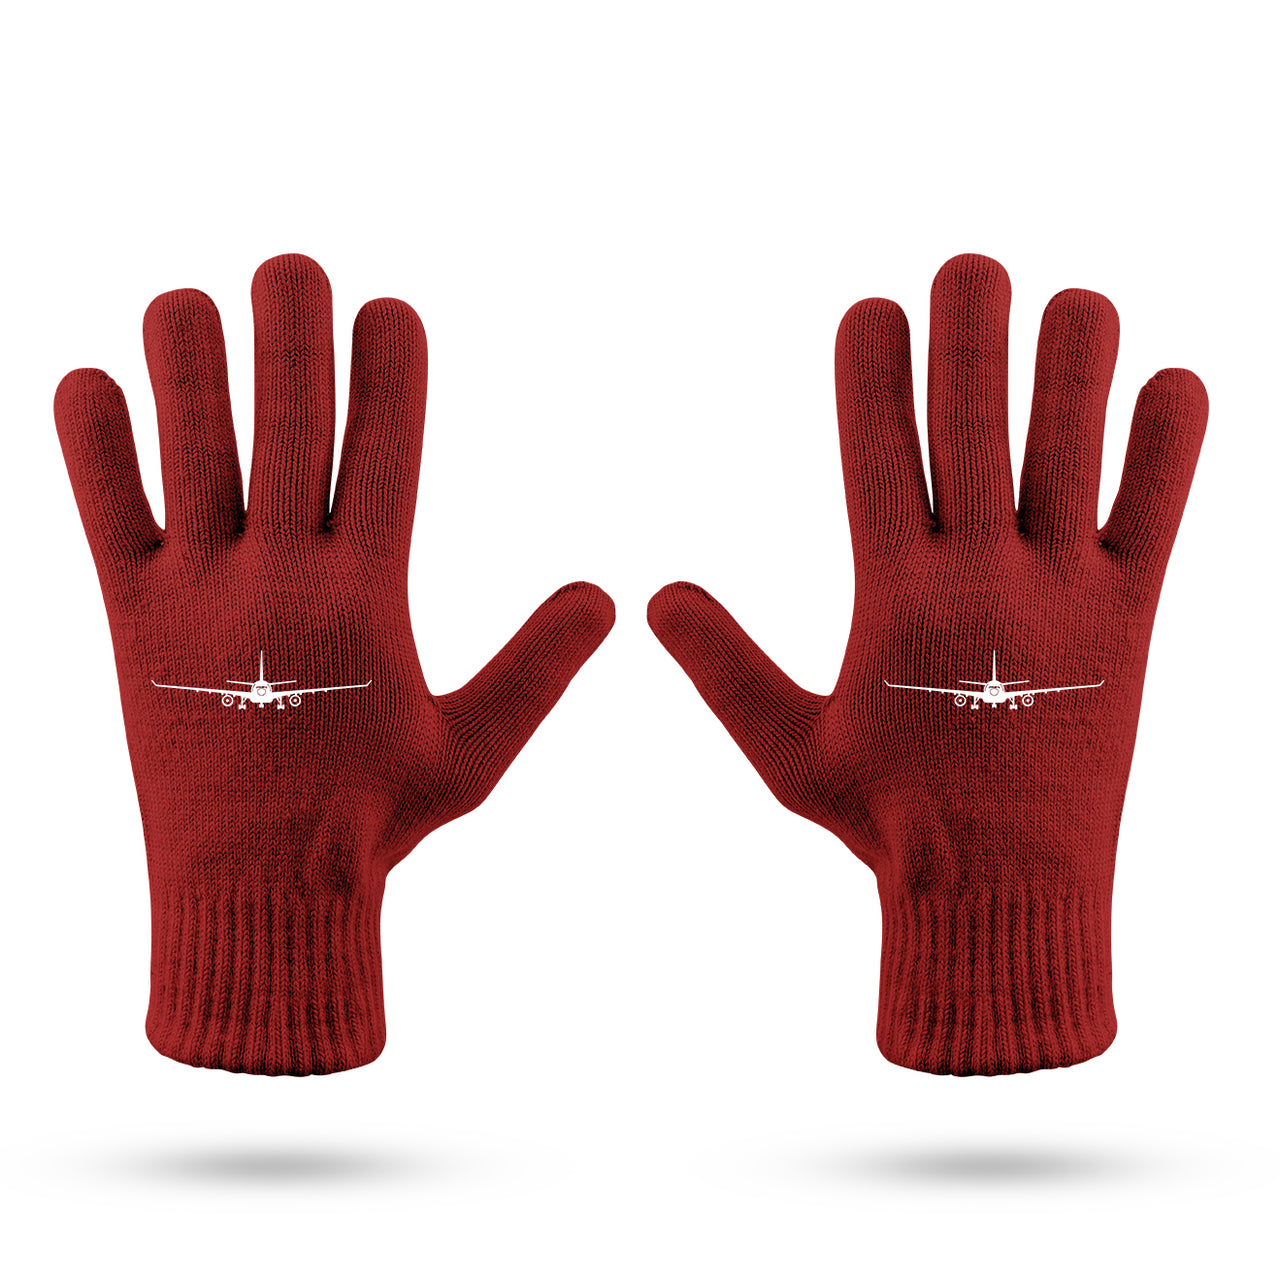 Airbus A330 Silhouette Designed Gloves